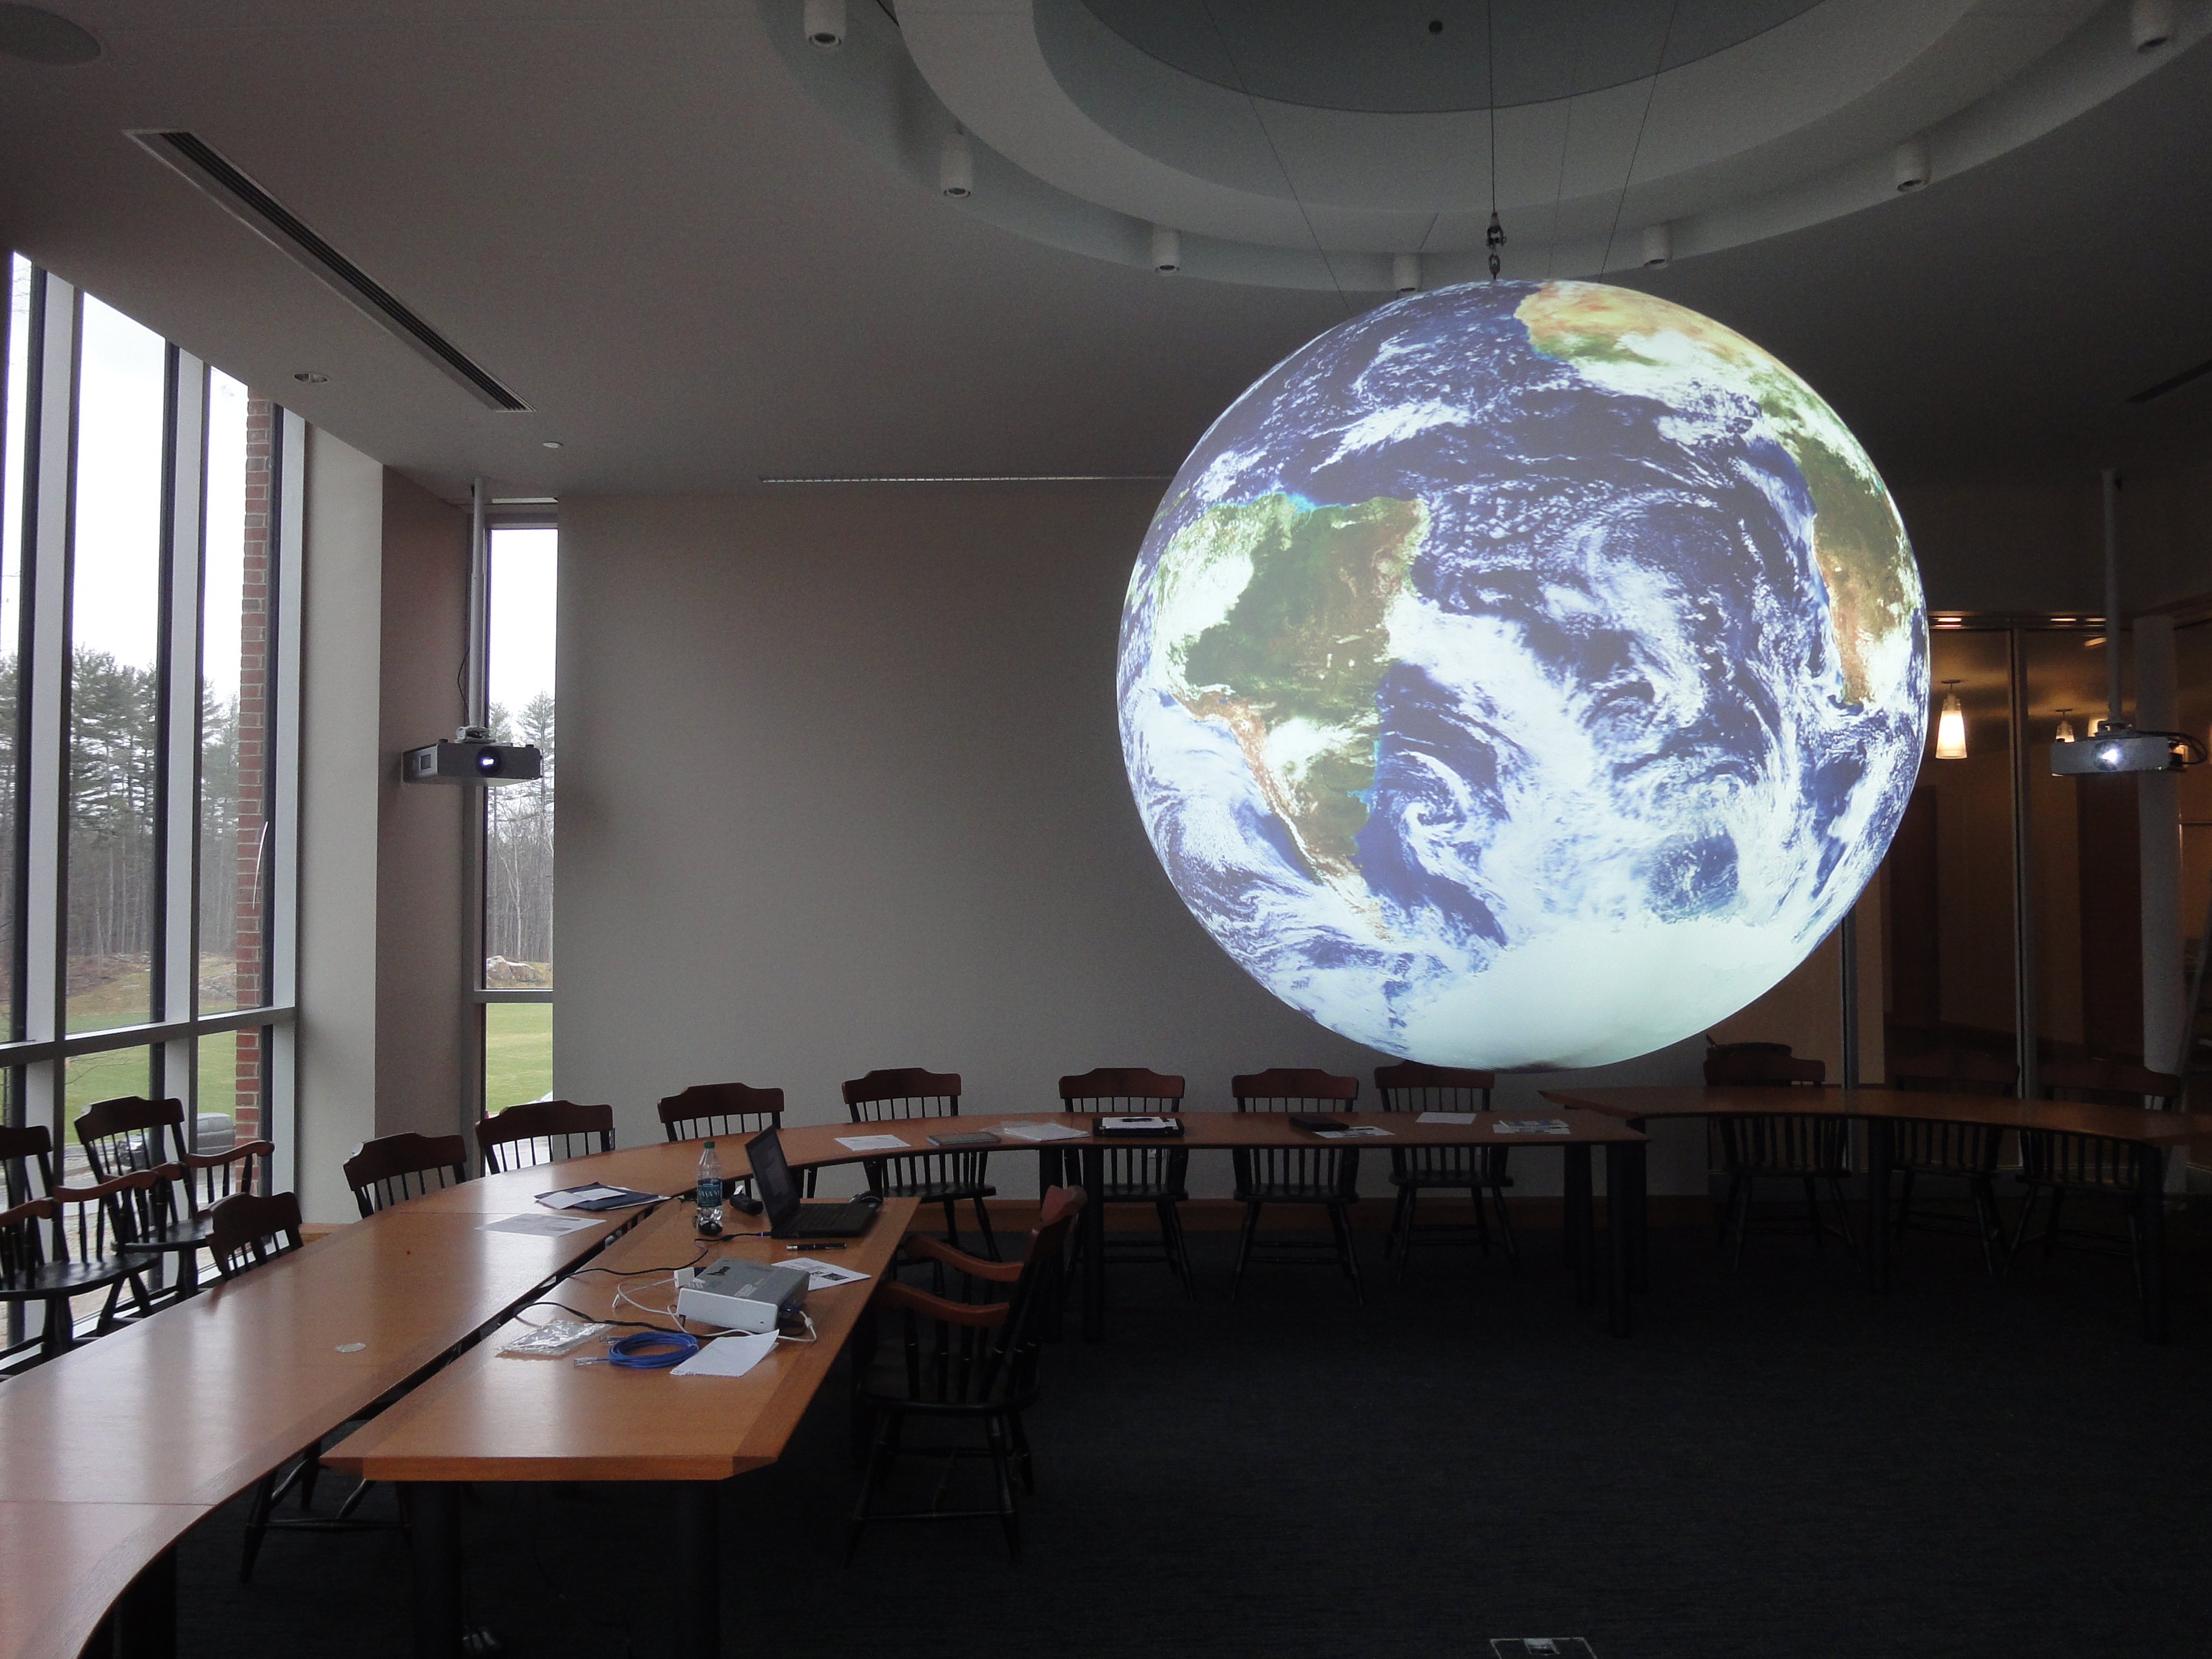 Science On a Sphere hangs in an empty room surrounded by a long, curved conference table with wooden chairs